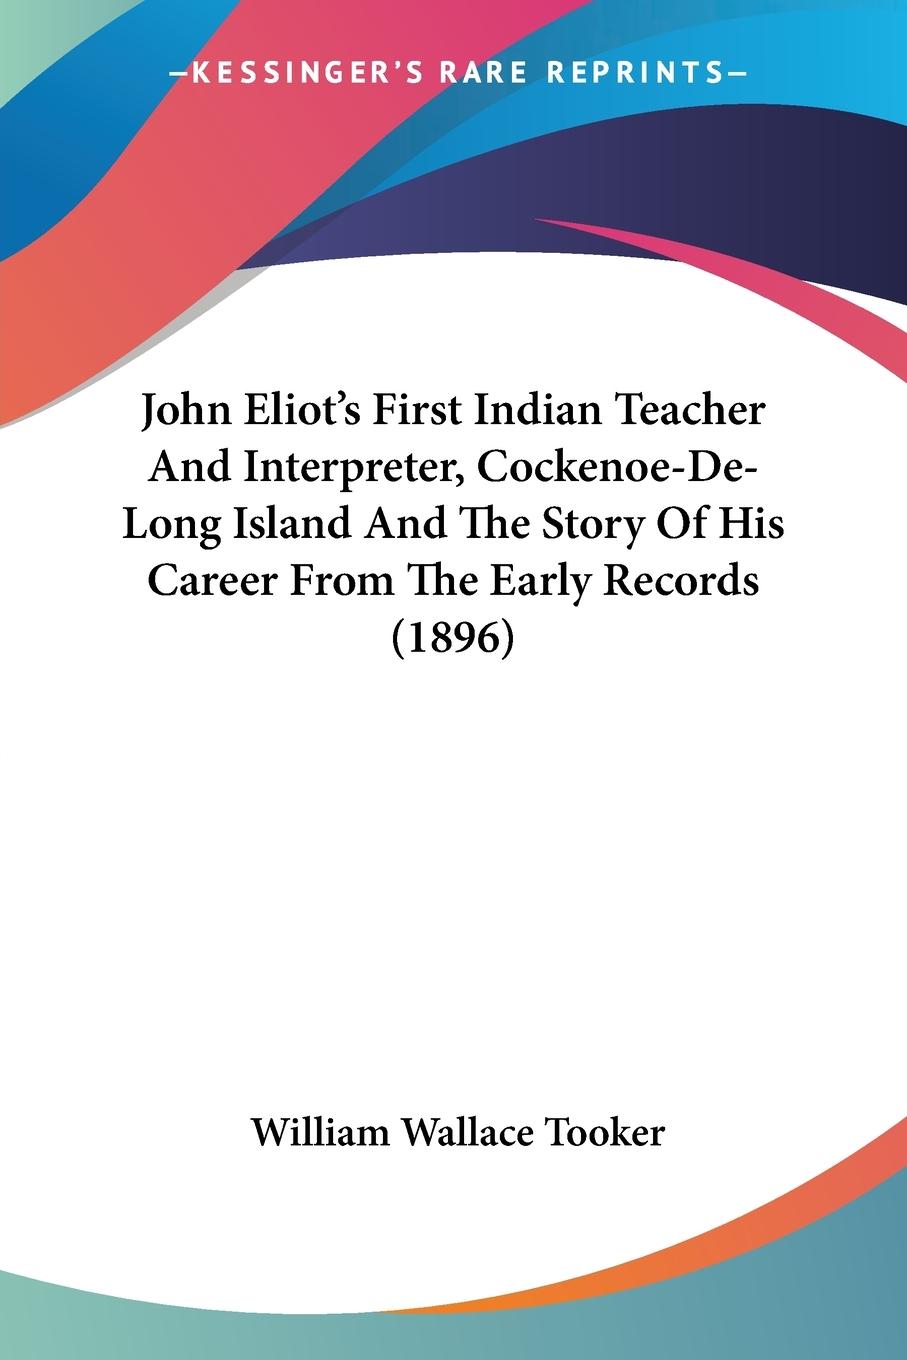 John Eliot s First Indian Teacher And Interpreter, Cockenoe-De-Long Island And The Story Of His Career From The Early Records (1896) - Tooker, William Wallace